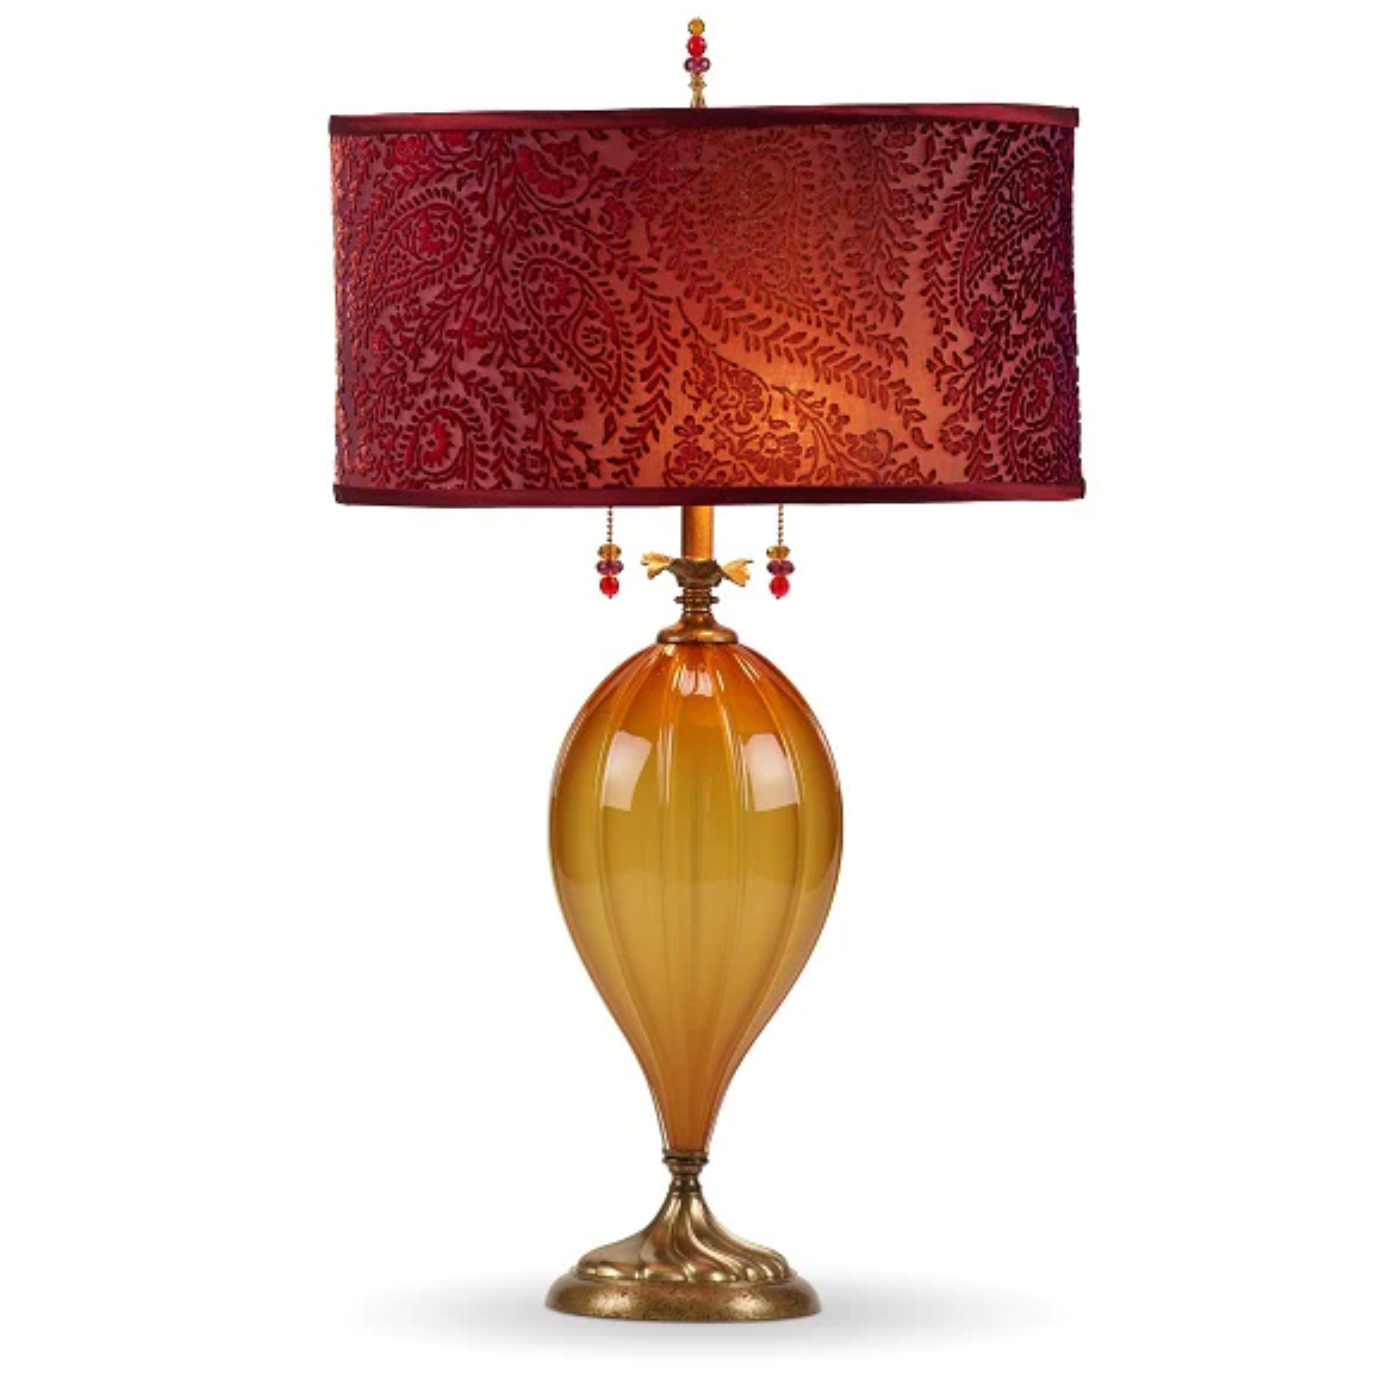 Kinzig Design "Claire" table lamp (IN STOCK)